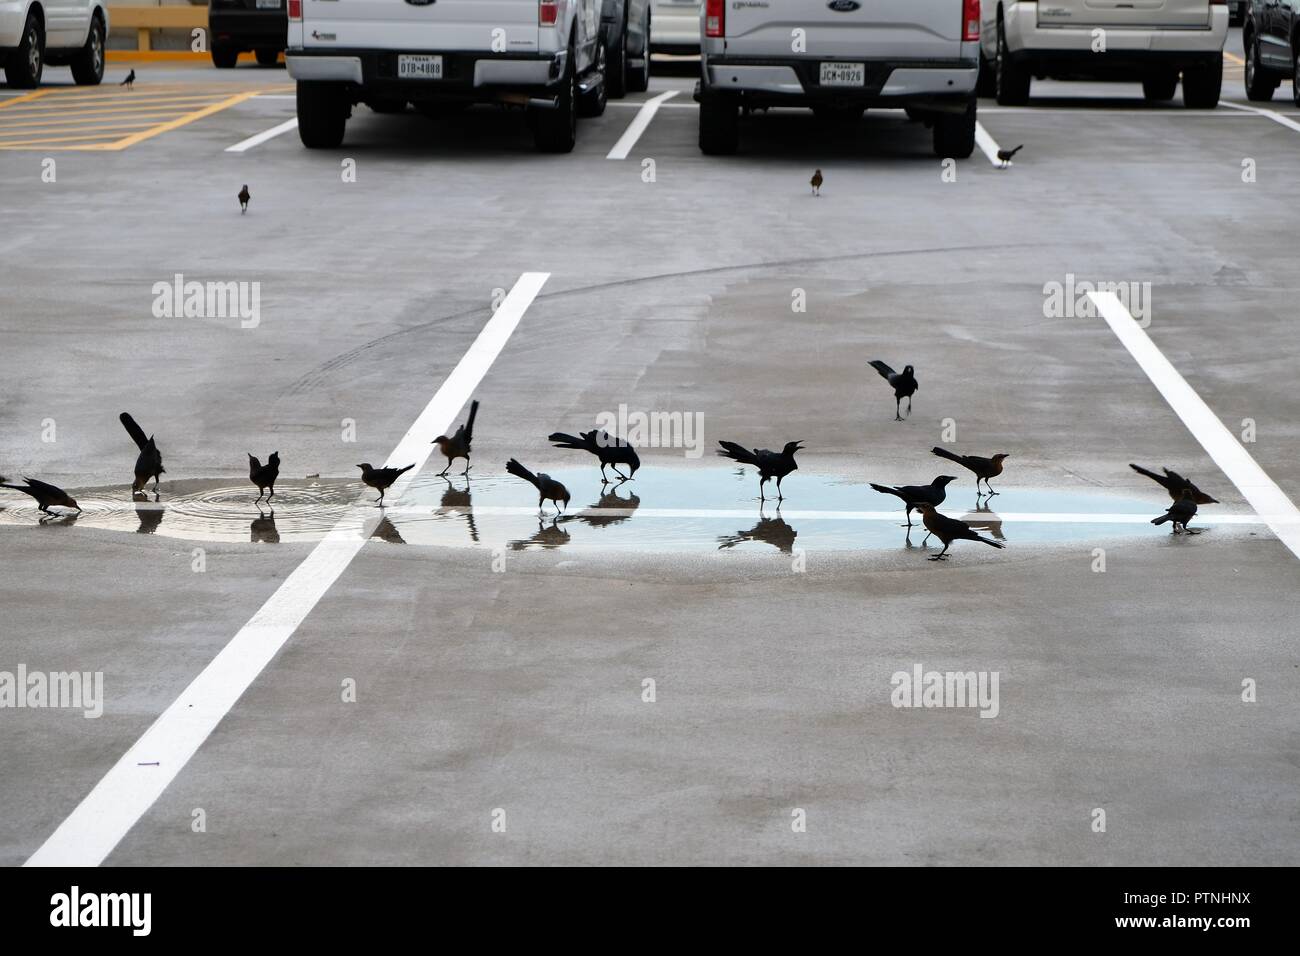 Common grackles (Quiscalus quiscula) in a puddle of water in a parking lot in Houston, Texas, USA. Stock Photo